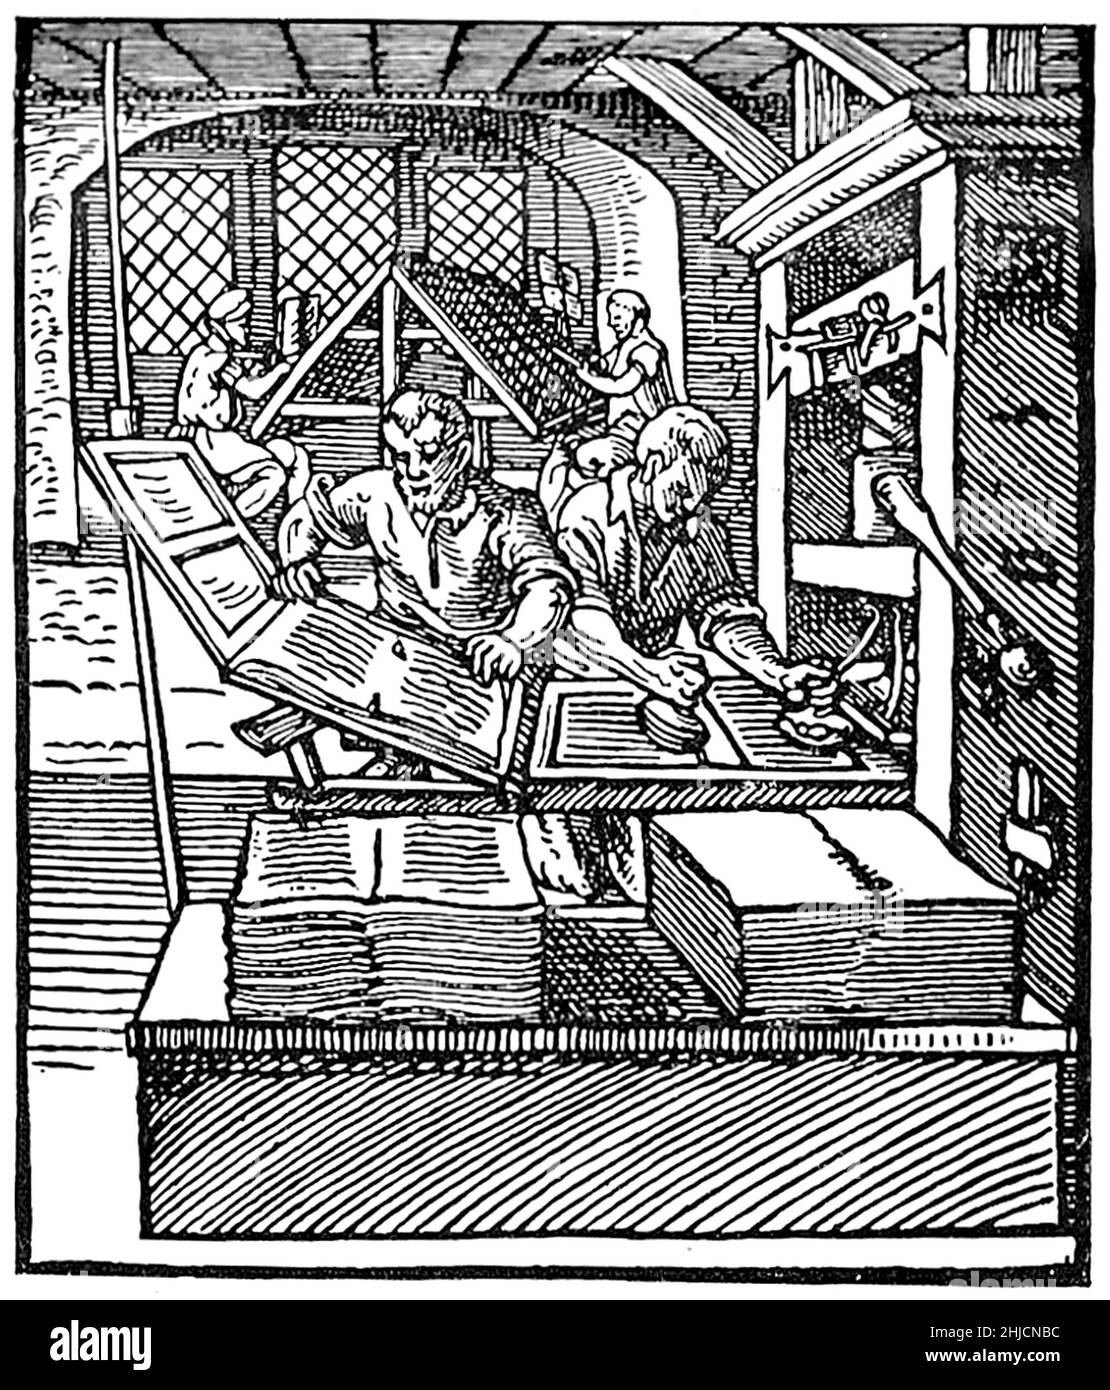 Woodcut of medieval tradesmen working at a 16th-century printing press. The printers are in the foreground; in the background, two compositors work on typesetting and preparing the printing blocks. Illustration from Jost Amman's Book of Trades, 1568. Stock Photo